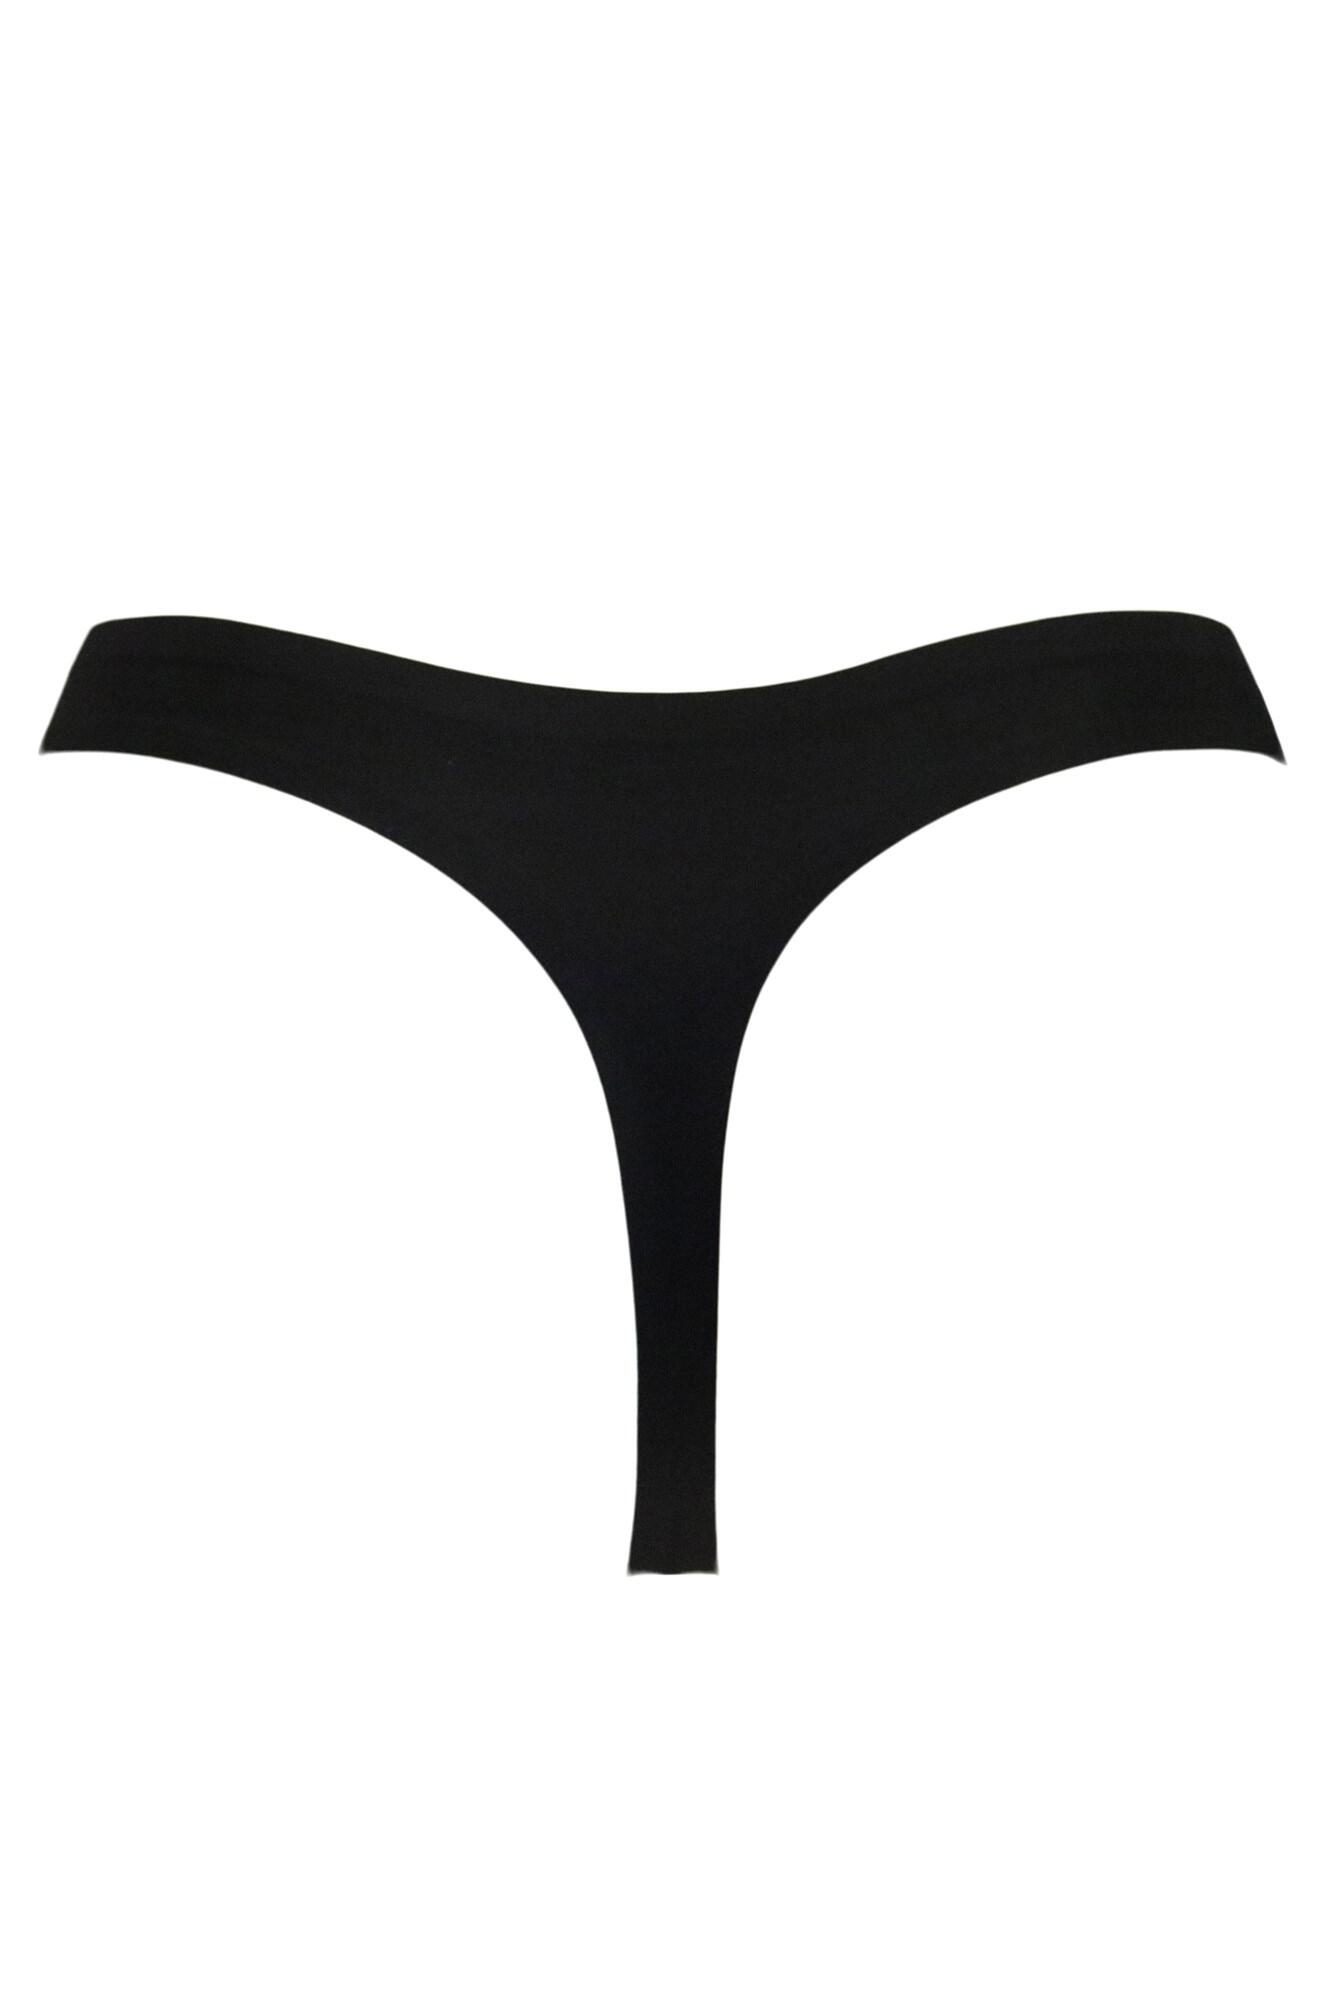 Black Thongs Sale, Up to 70% Off